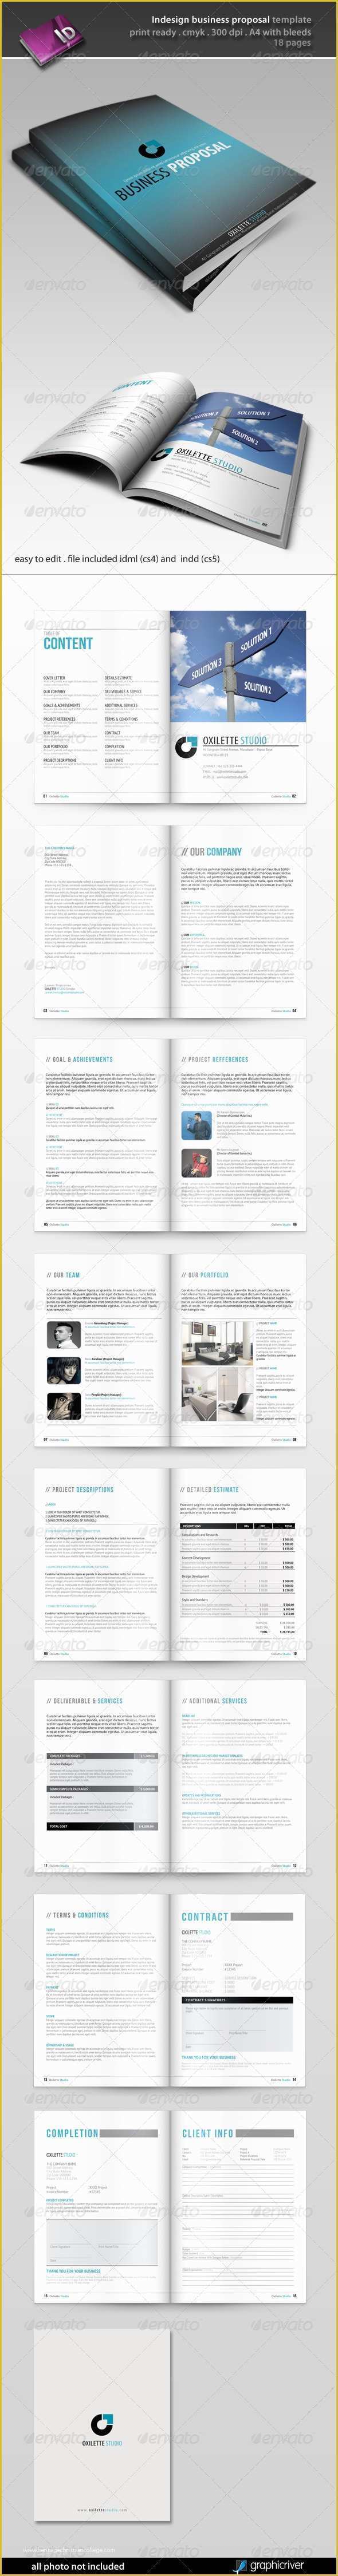 Indesign Business Proposal Templates Free Of Indesign Business Proposal Template by Semarmesem